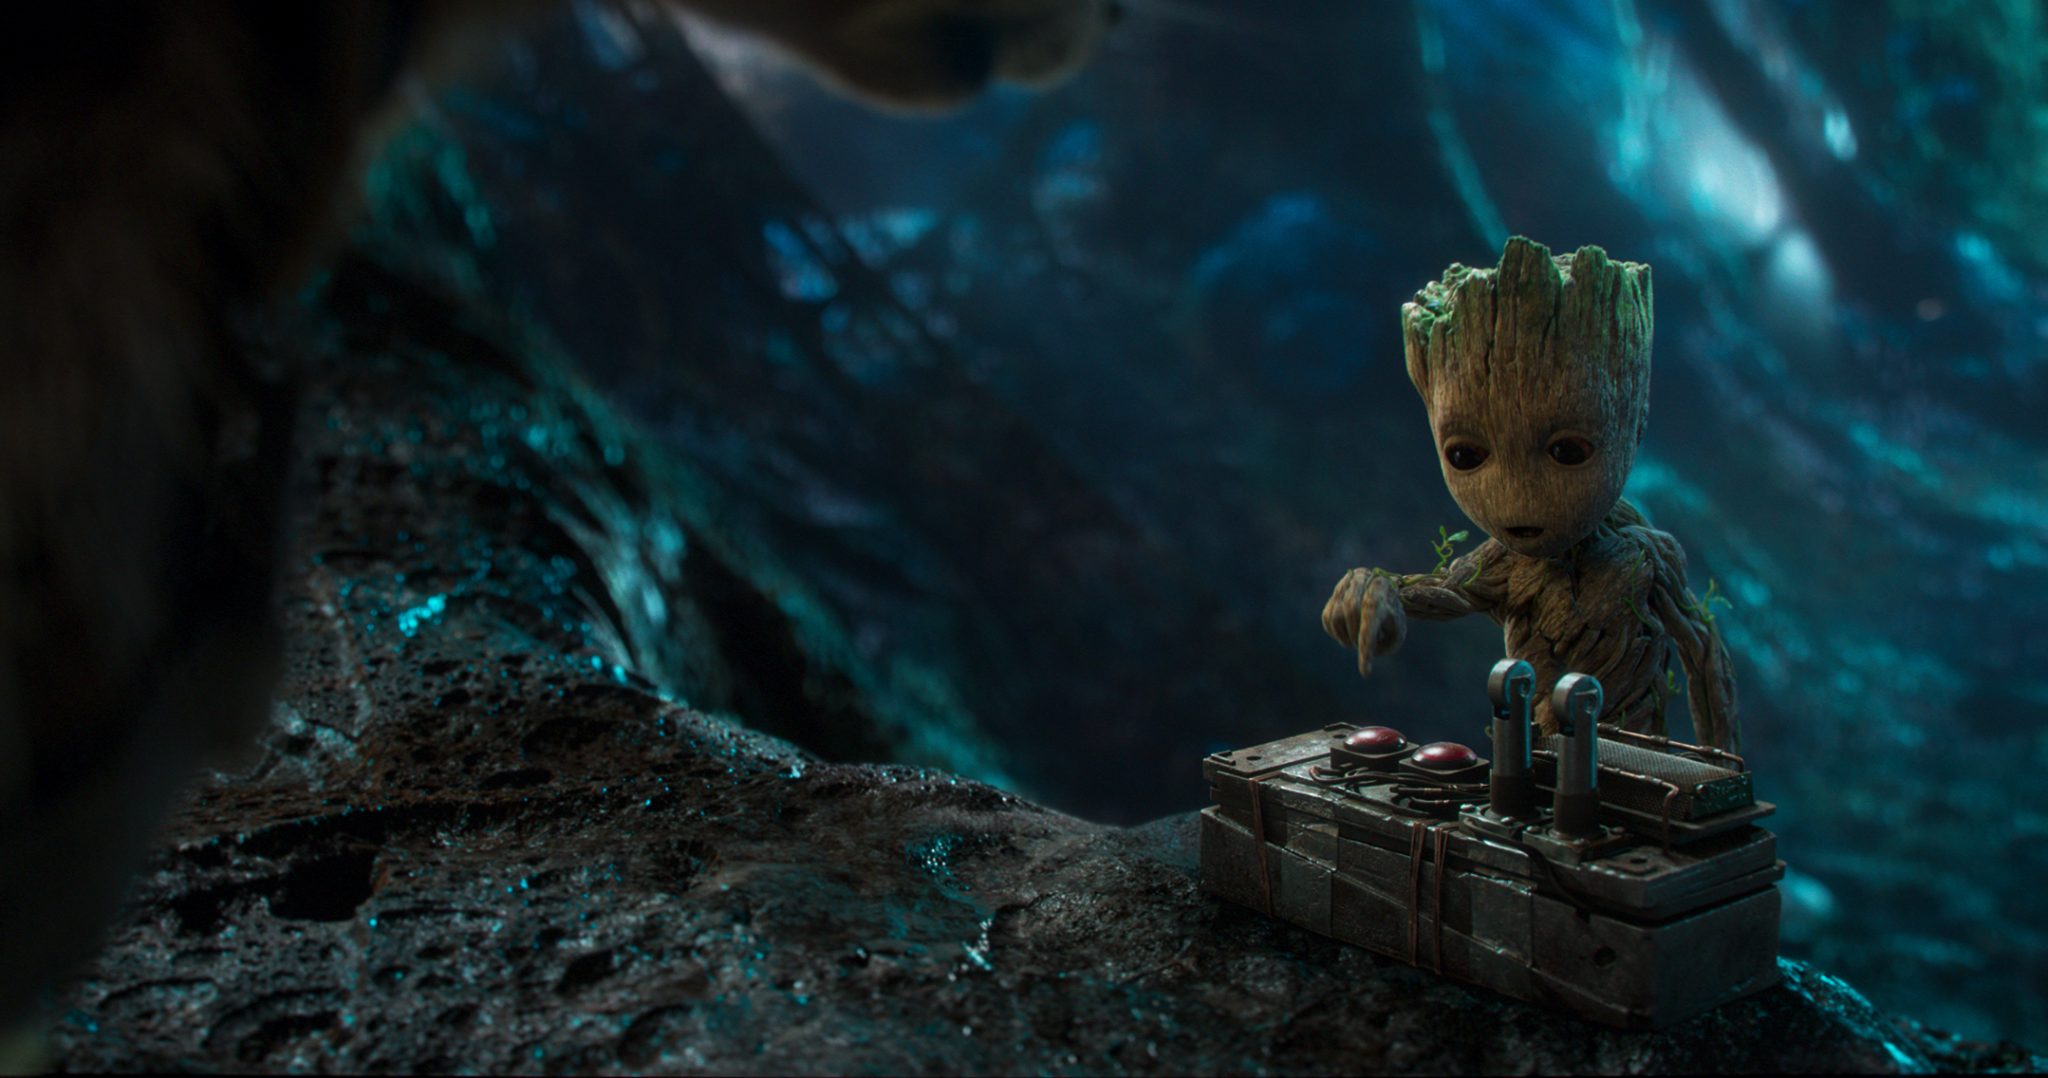 Reviewing Guardians of the Galaxy vol. 2